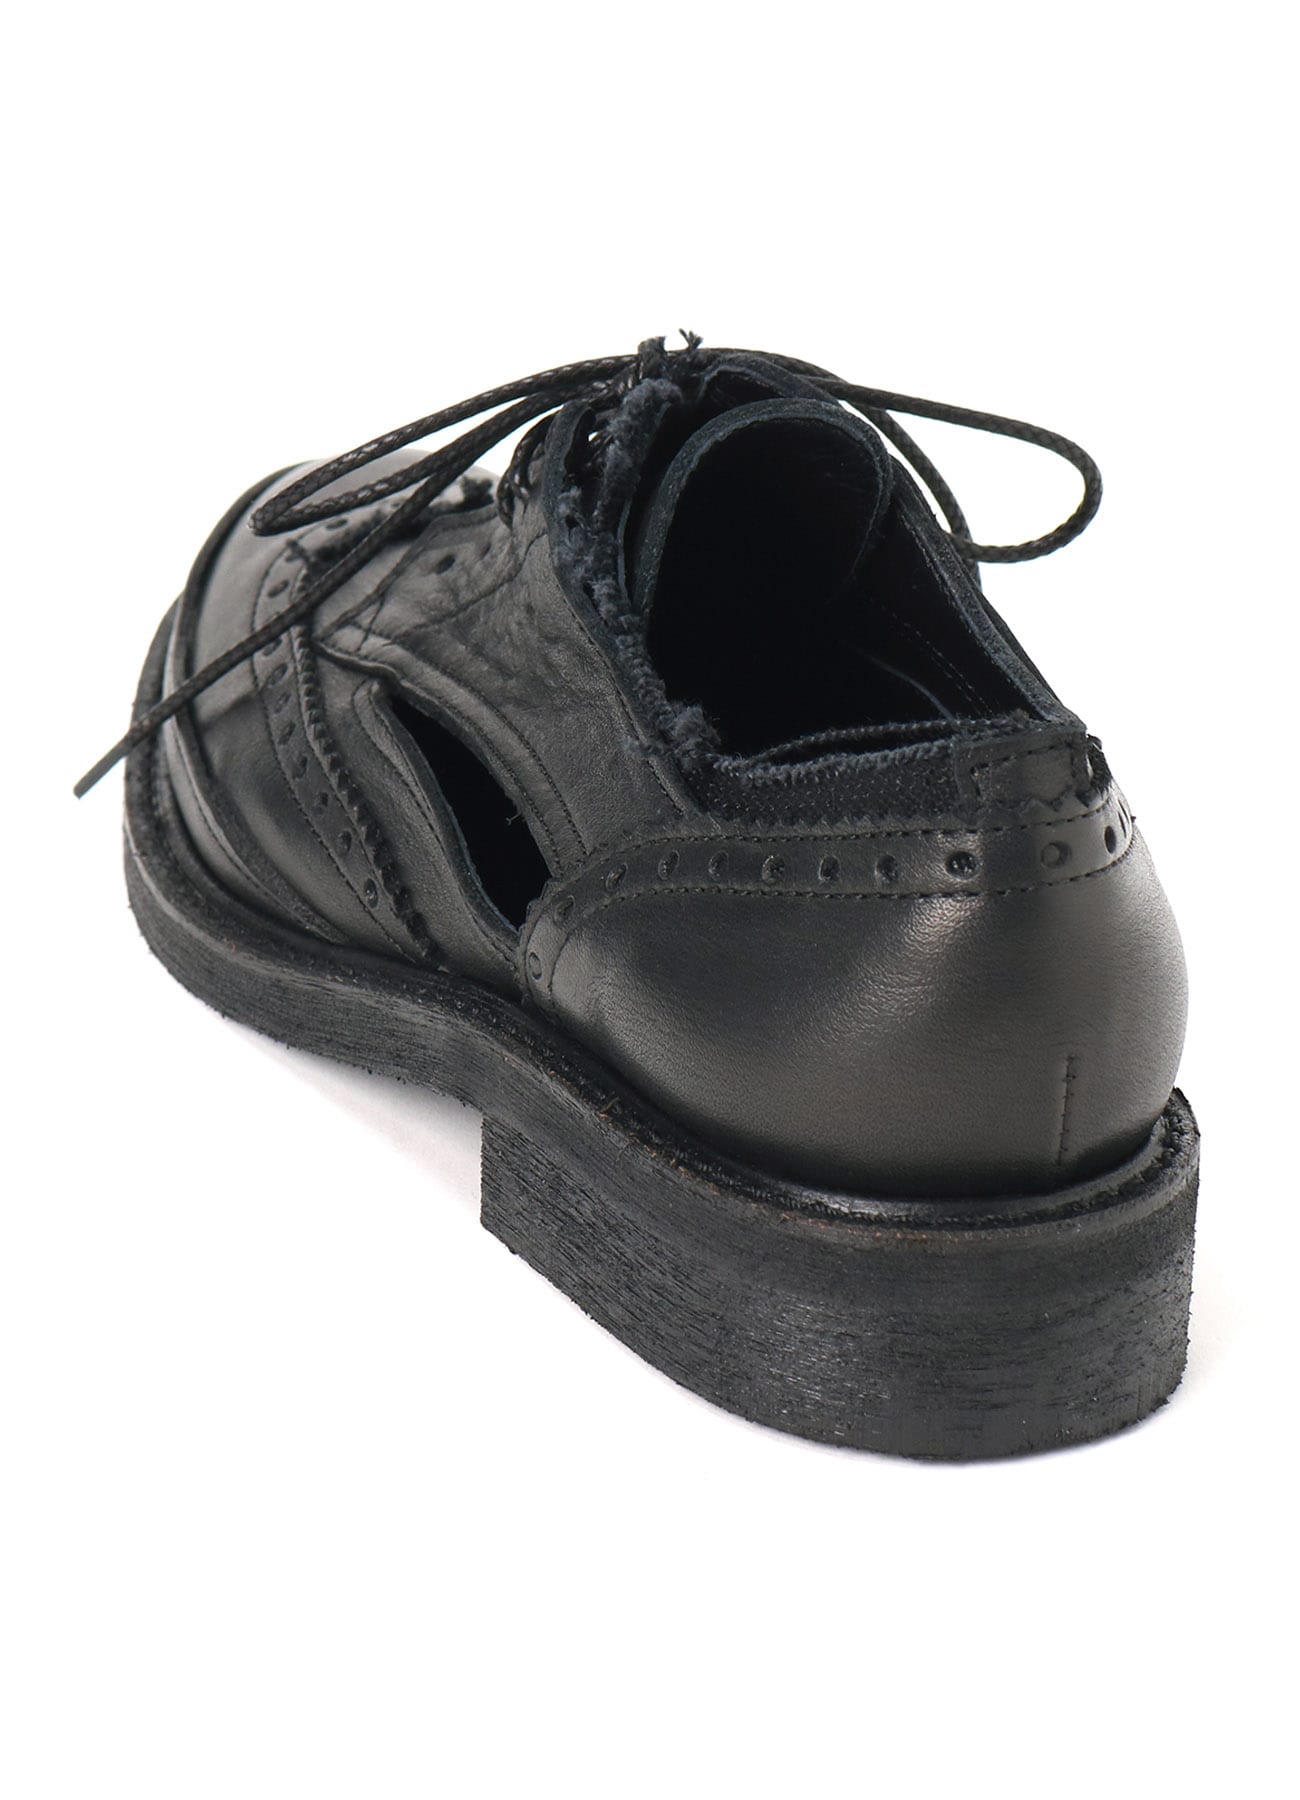 CANVAS/LEATHER COMBINATION WING CHIP SHOES(22.5 Black): Y's｜THE 